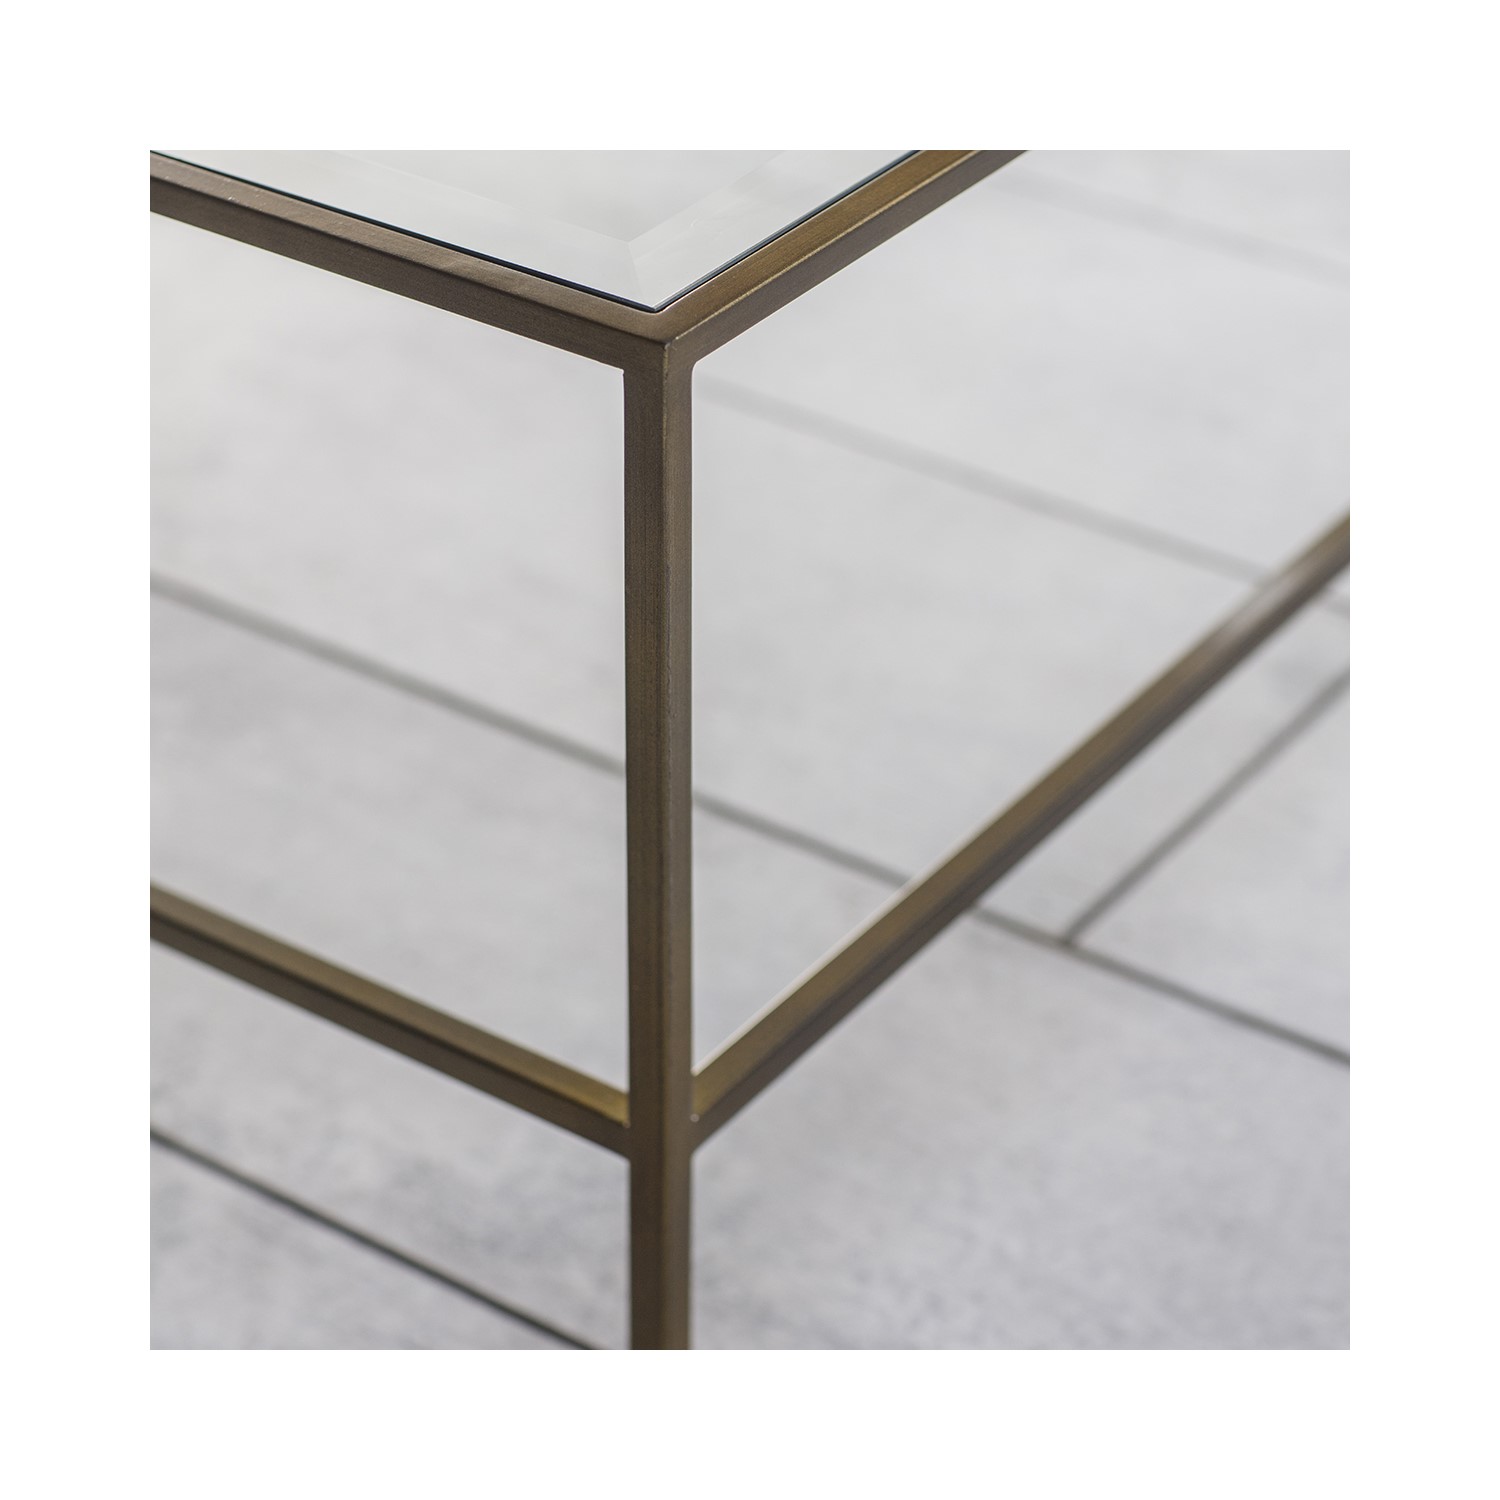 Read more about Raya large bronze metal and glass coffee table caspian house